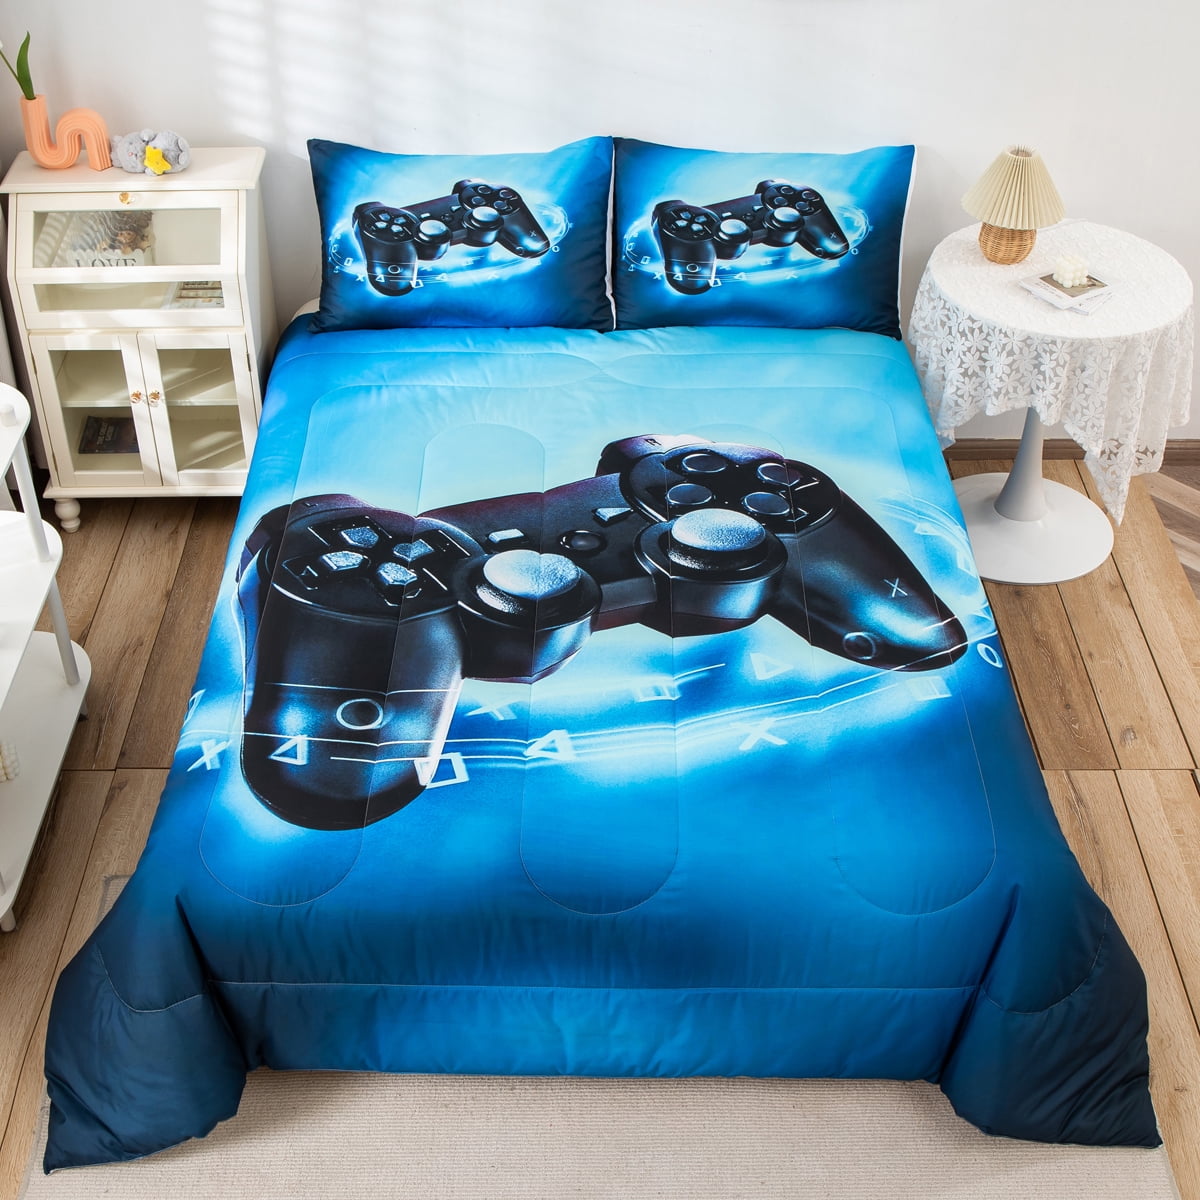 VIDEO GAME Blanket Comforter Reversible Console GIFT Teens Boys Red QUEEN 4 PCS 